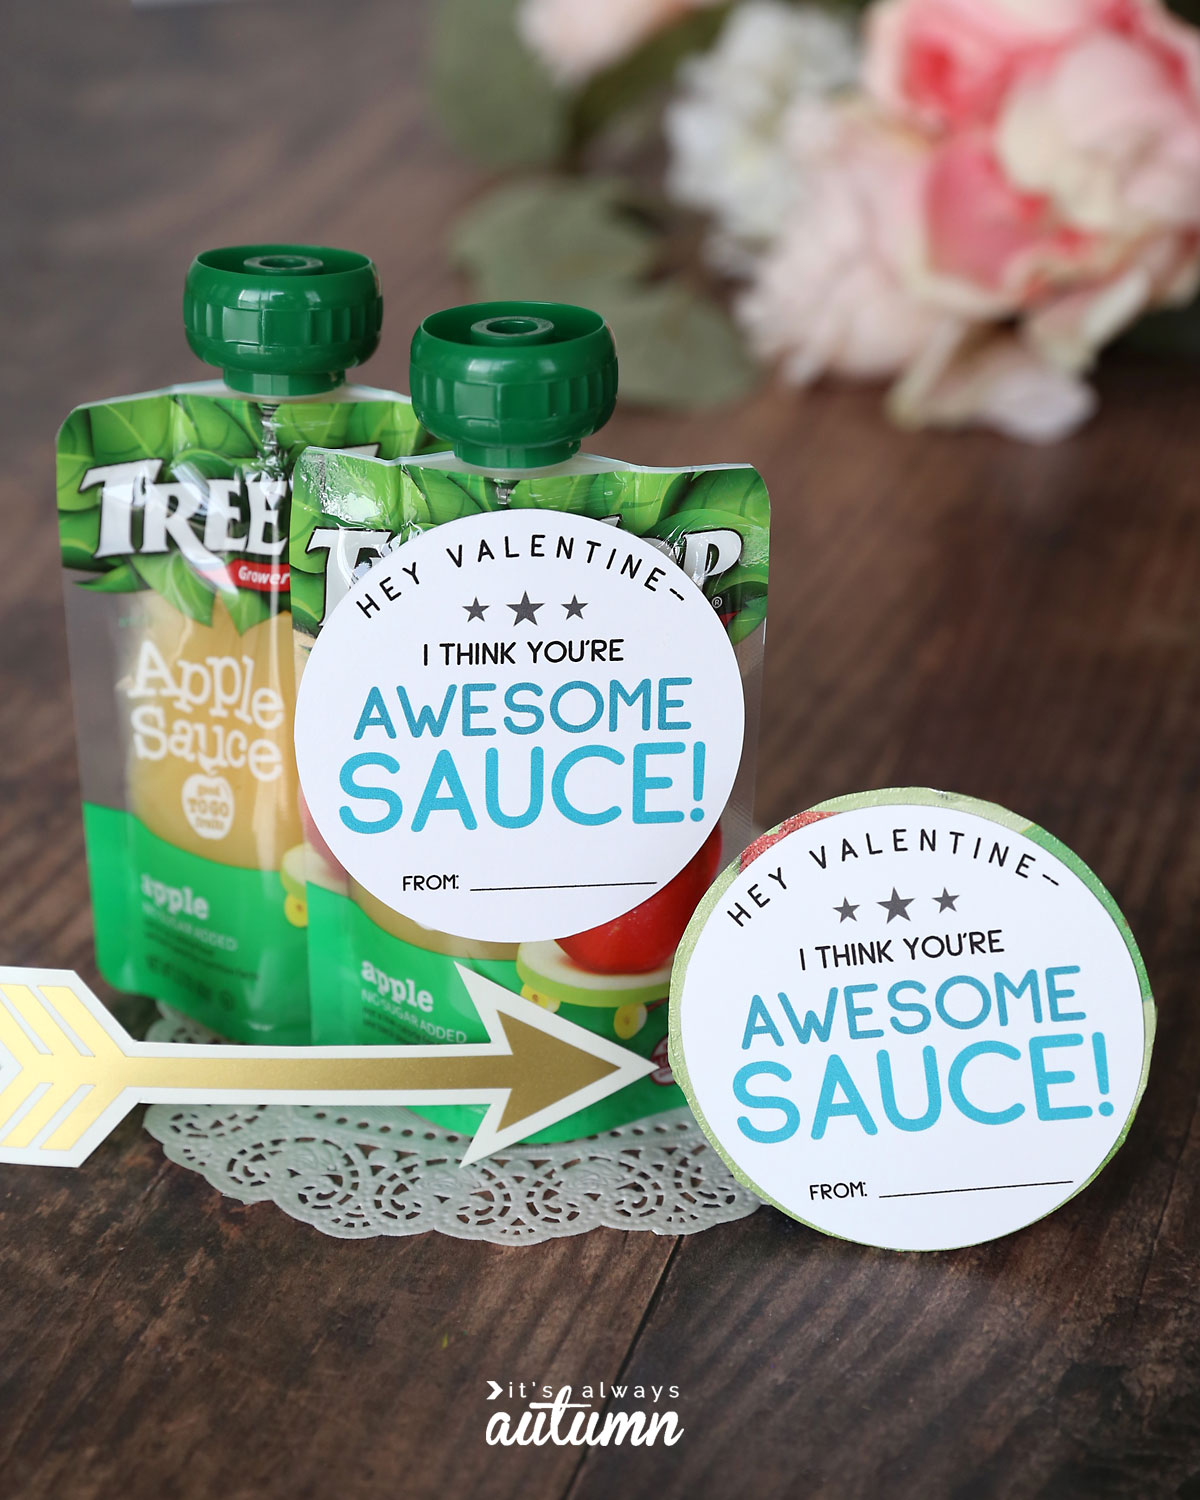 "I think you're awesome sauce" Valentine printable for applesauce